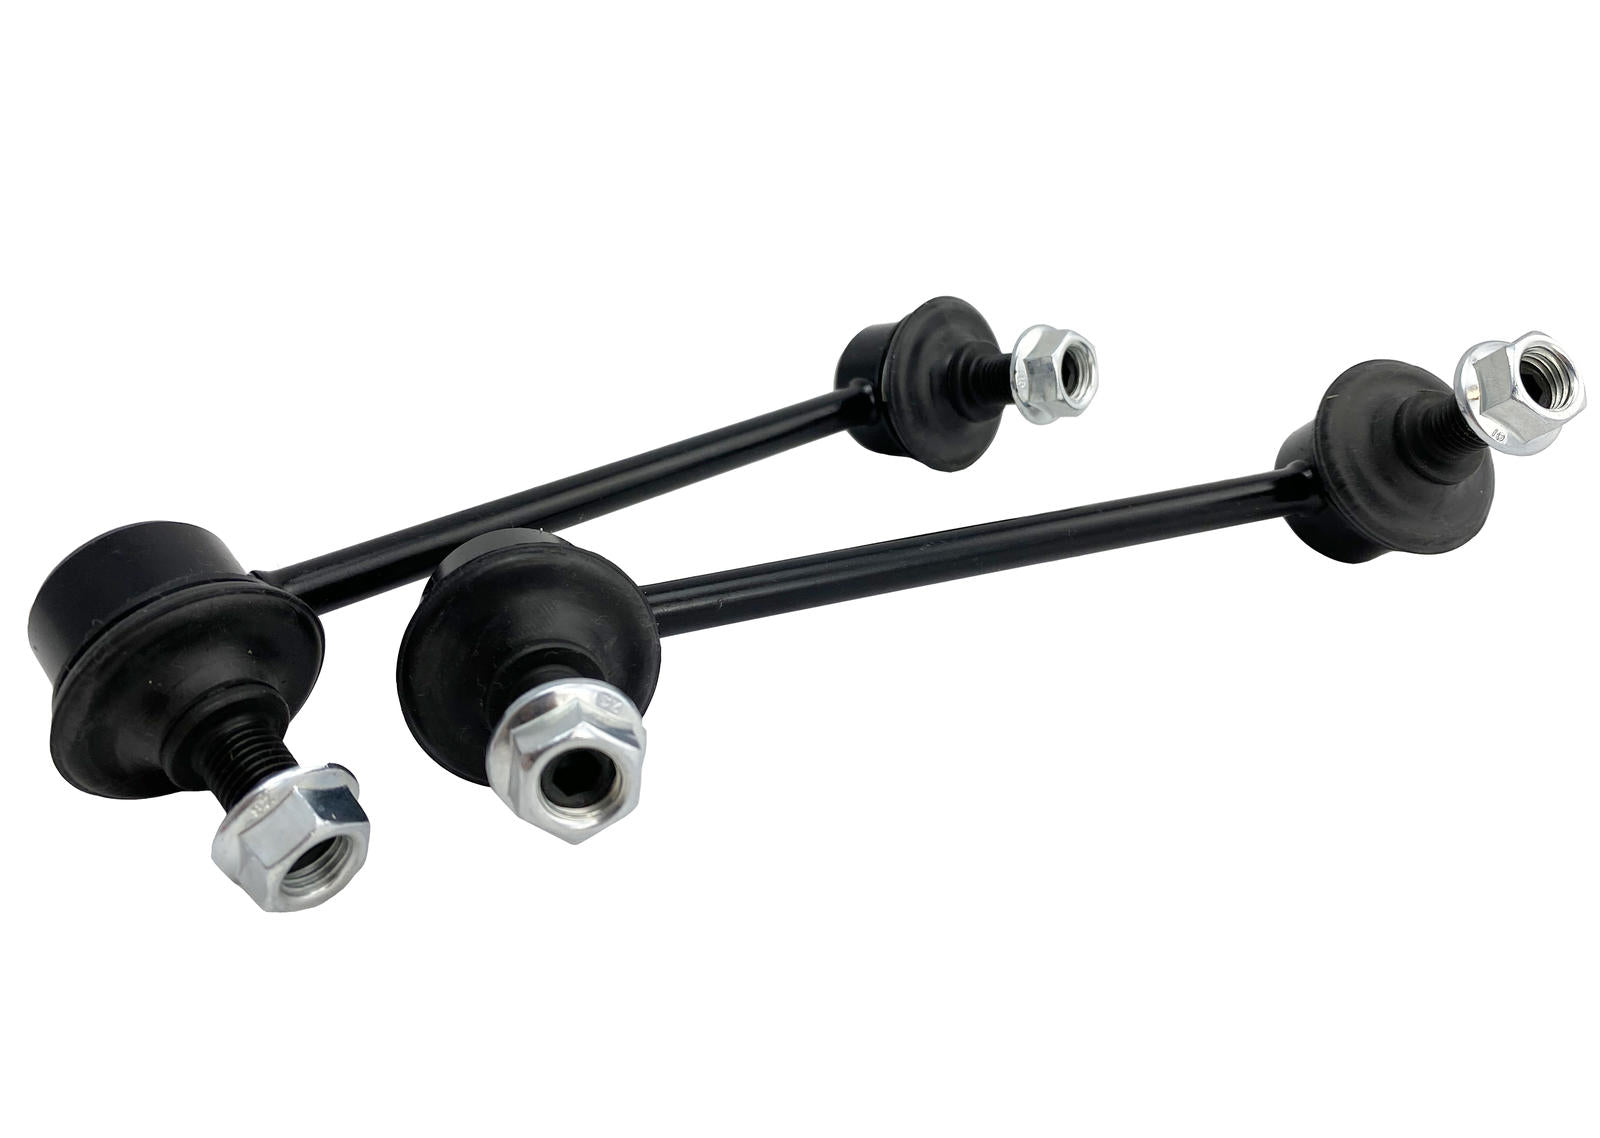 Rer Sway Bar Link To Suit Mazda CX-5, CX-9, Mazda3 And Mazda6 (W23699)